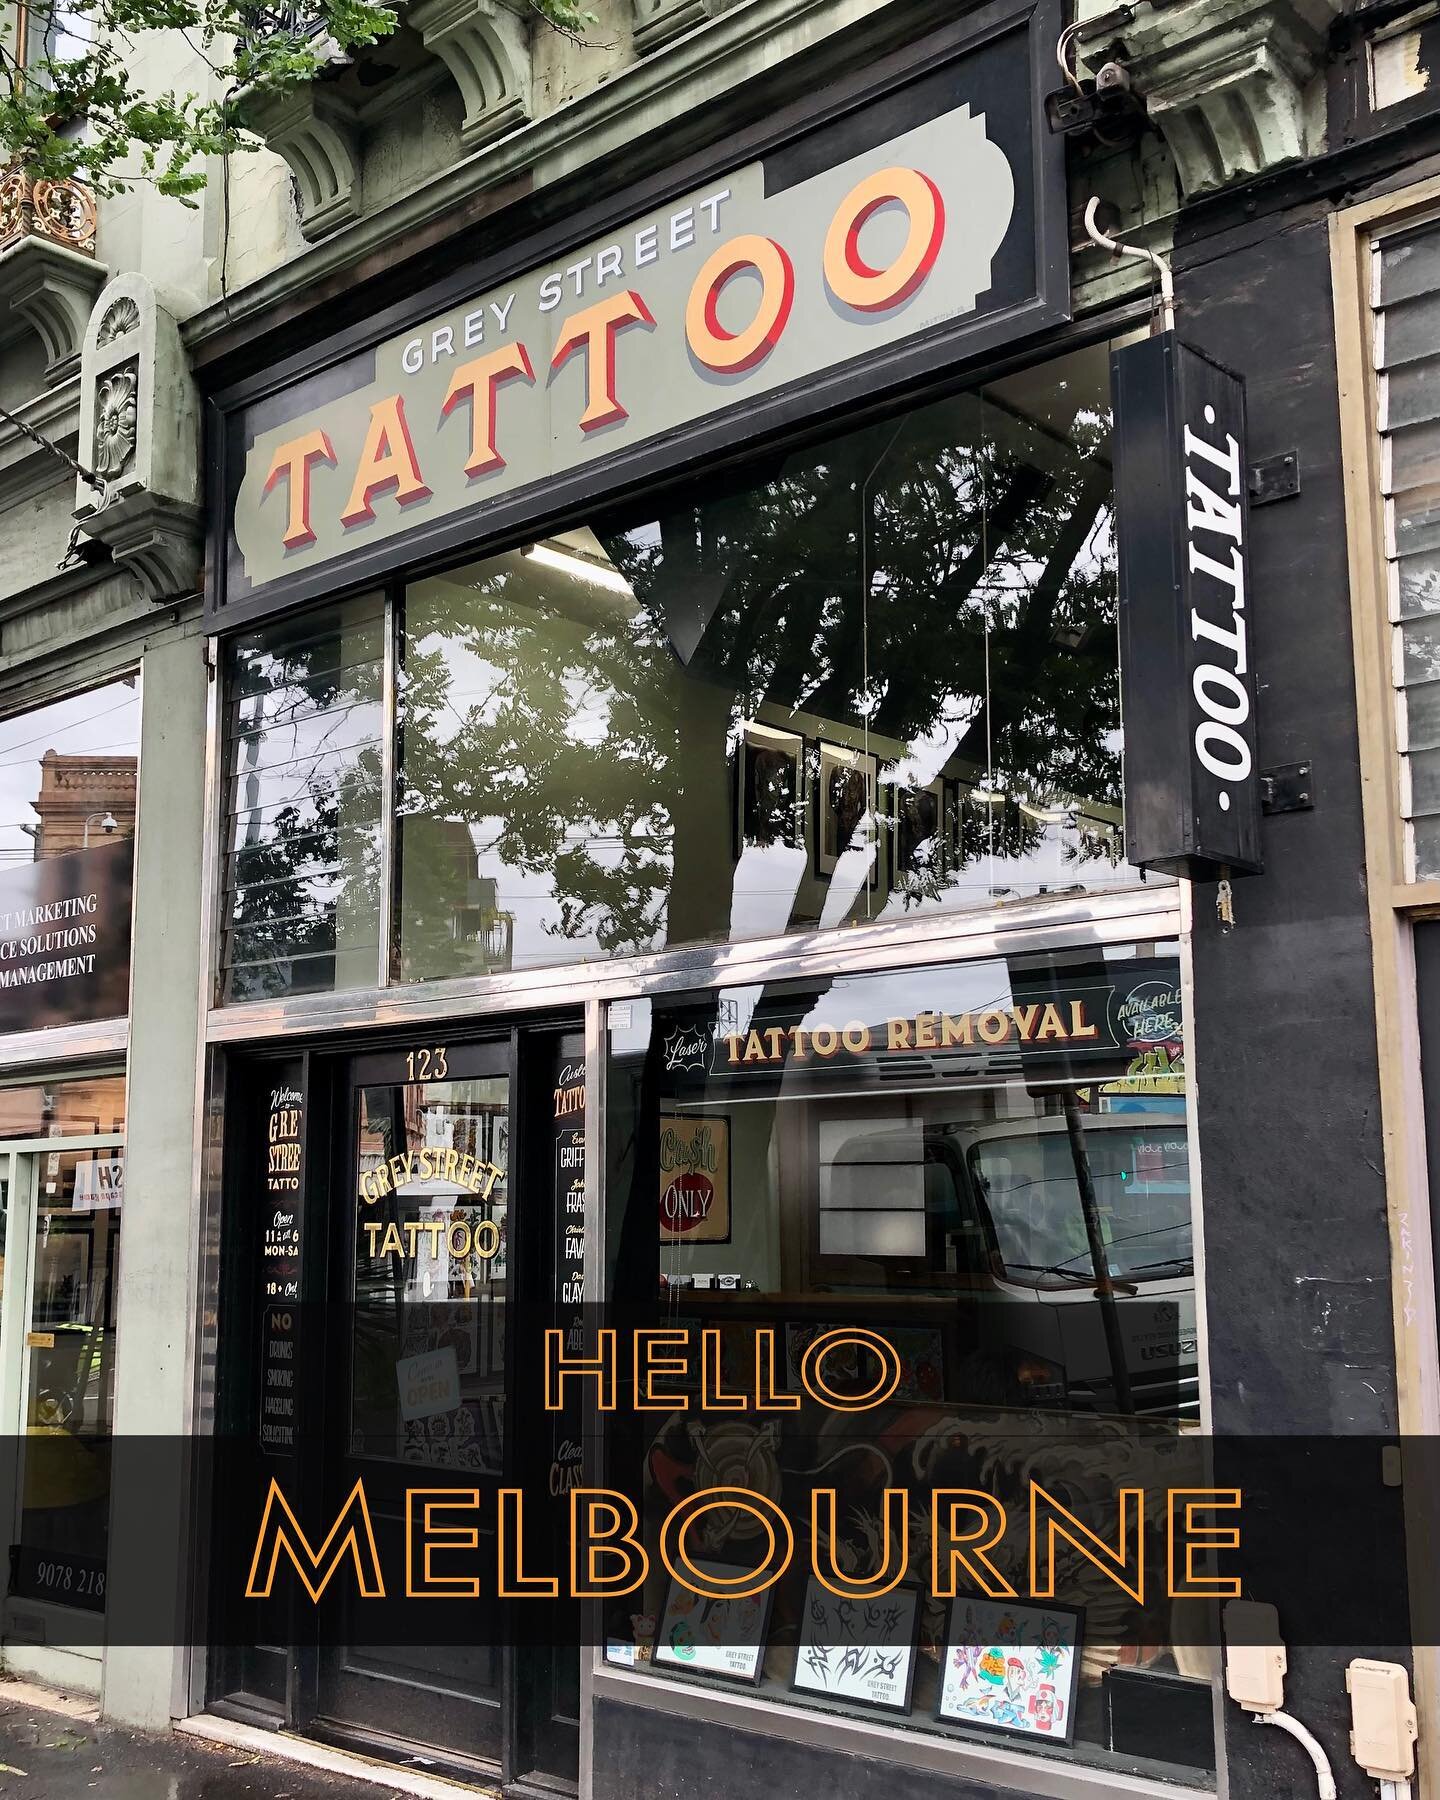 💥NEWS💥

After a wild month of packing up my life in Ireland and saying goodbye to the lovely people of Galway, I&rsquo;ve now landed on the ground and started to get settled back in Melbourne.

Next week I&rsquo;ll be back tattooing and can&rsquo;t